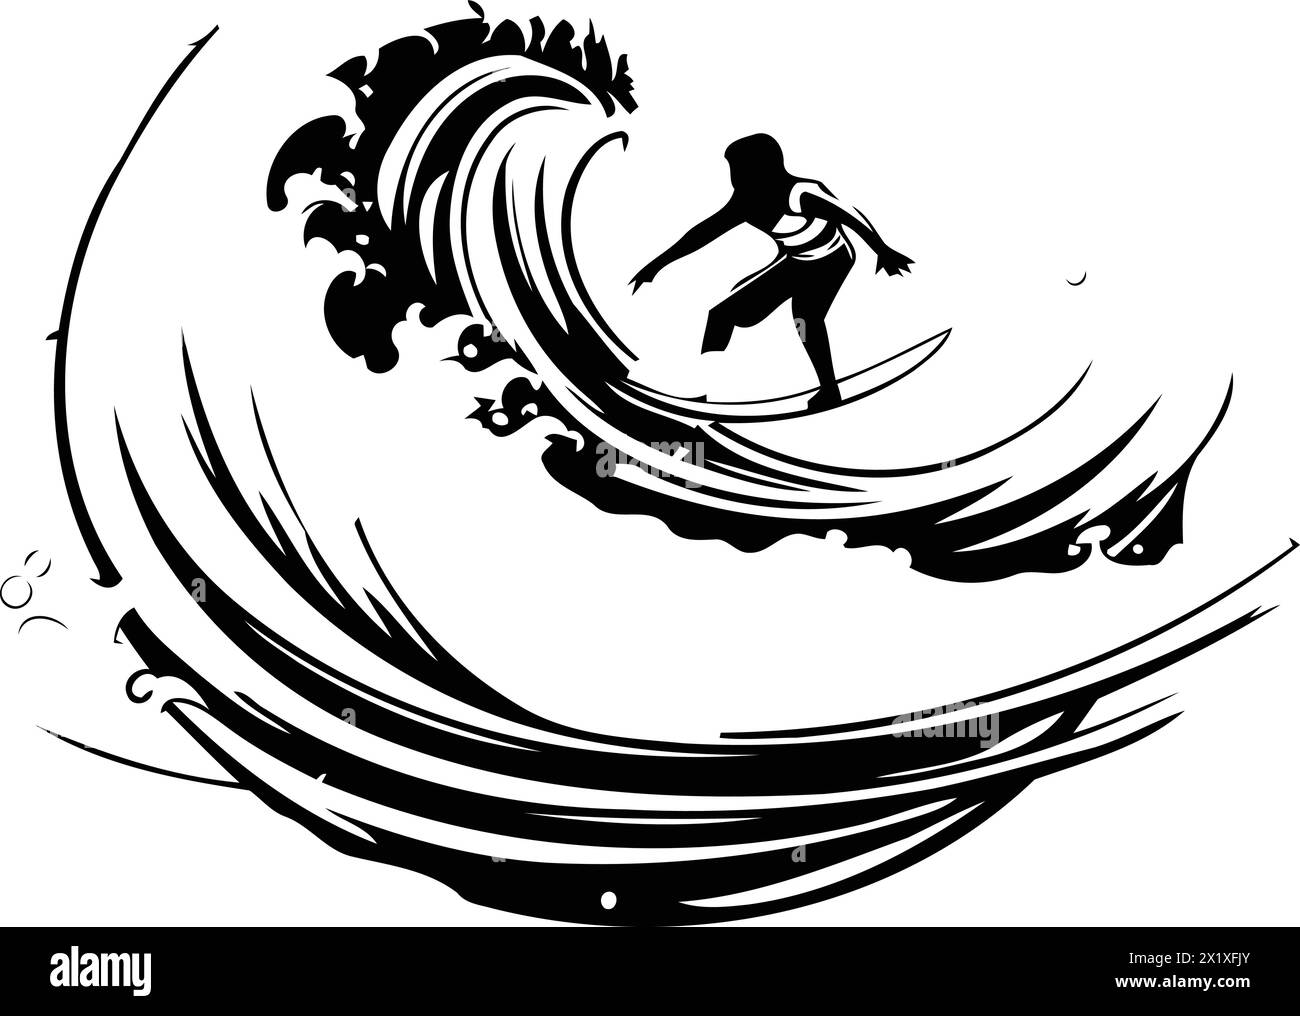 Surfer on the wave. Vector illustration in cartoon style isolated on white background. Stock Vector